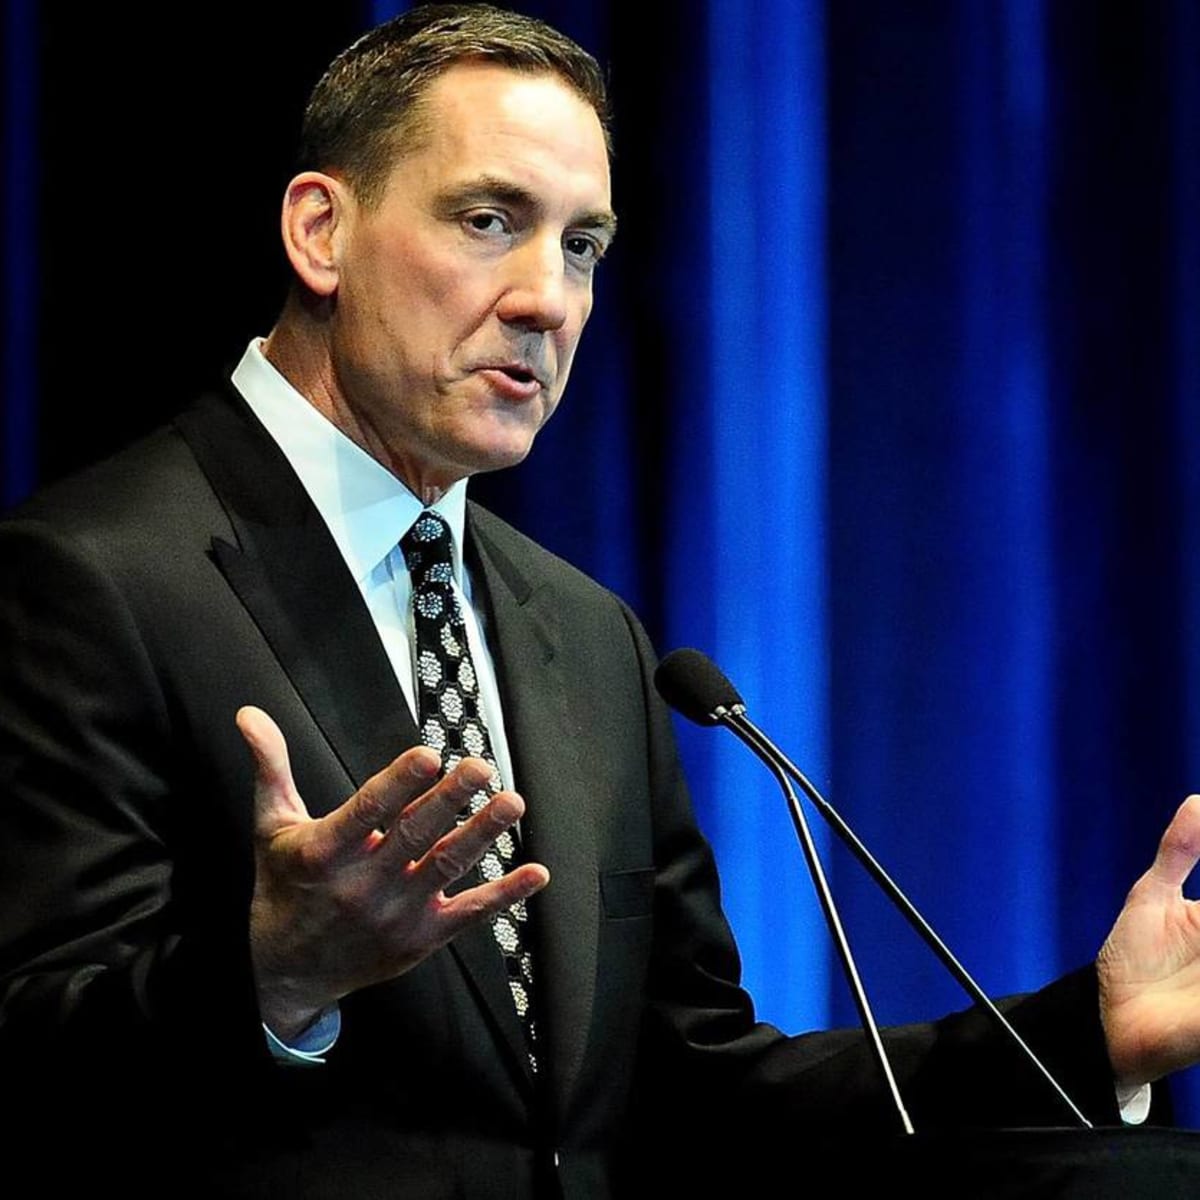 NBC's Todd Blackledge Explains Why He Left ESPN After 17 Years